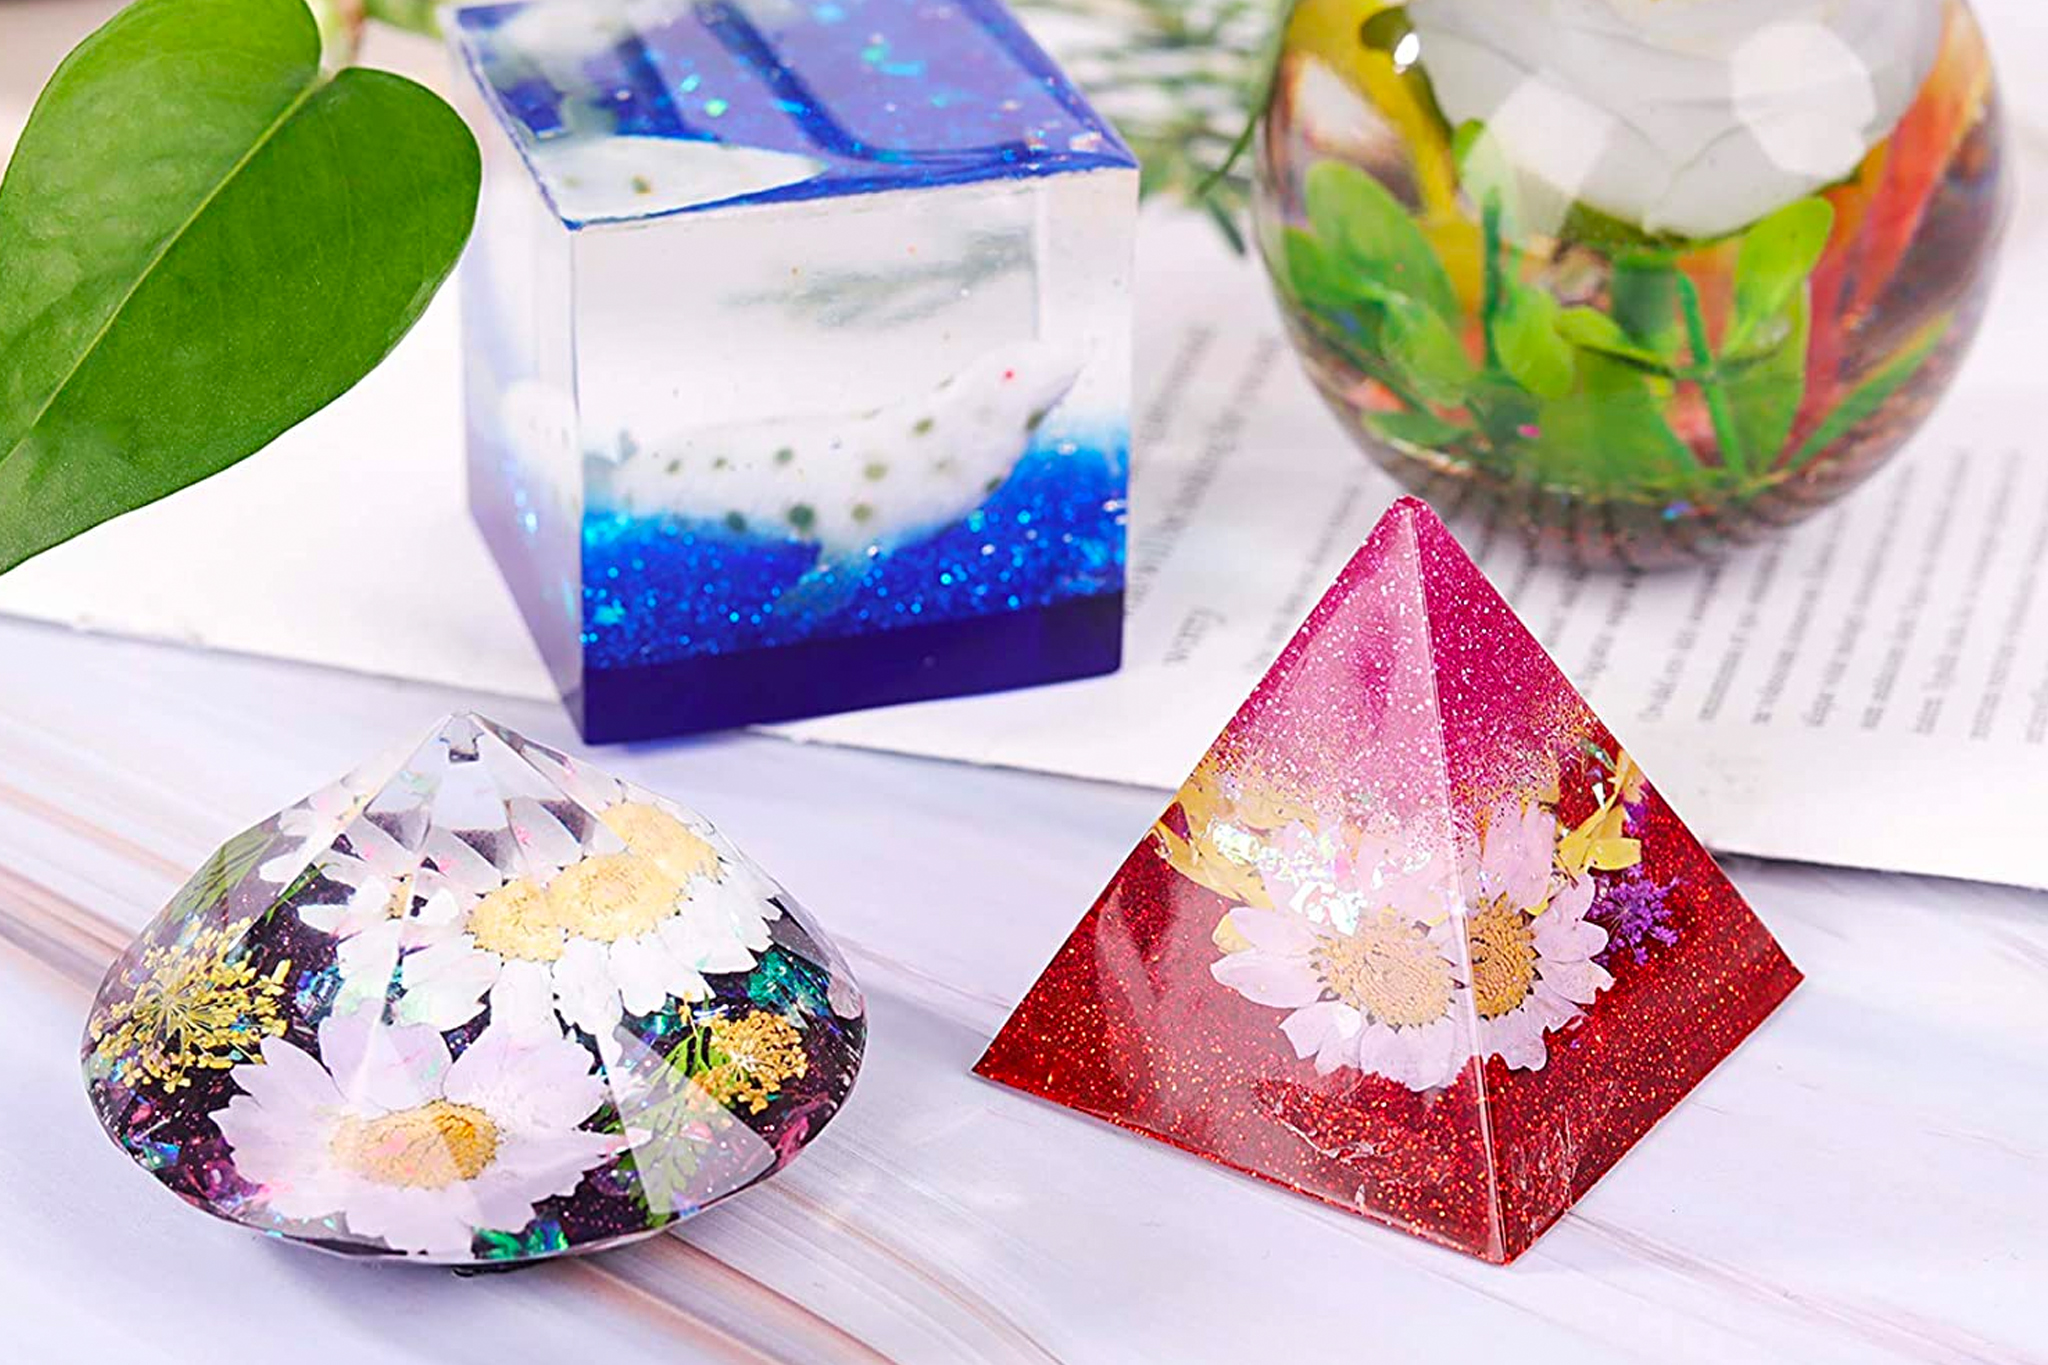 How to make resin art - Essential supplies for making epoxy resin art